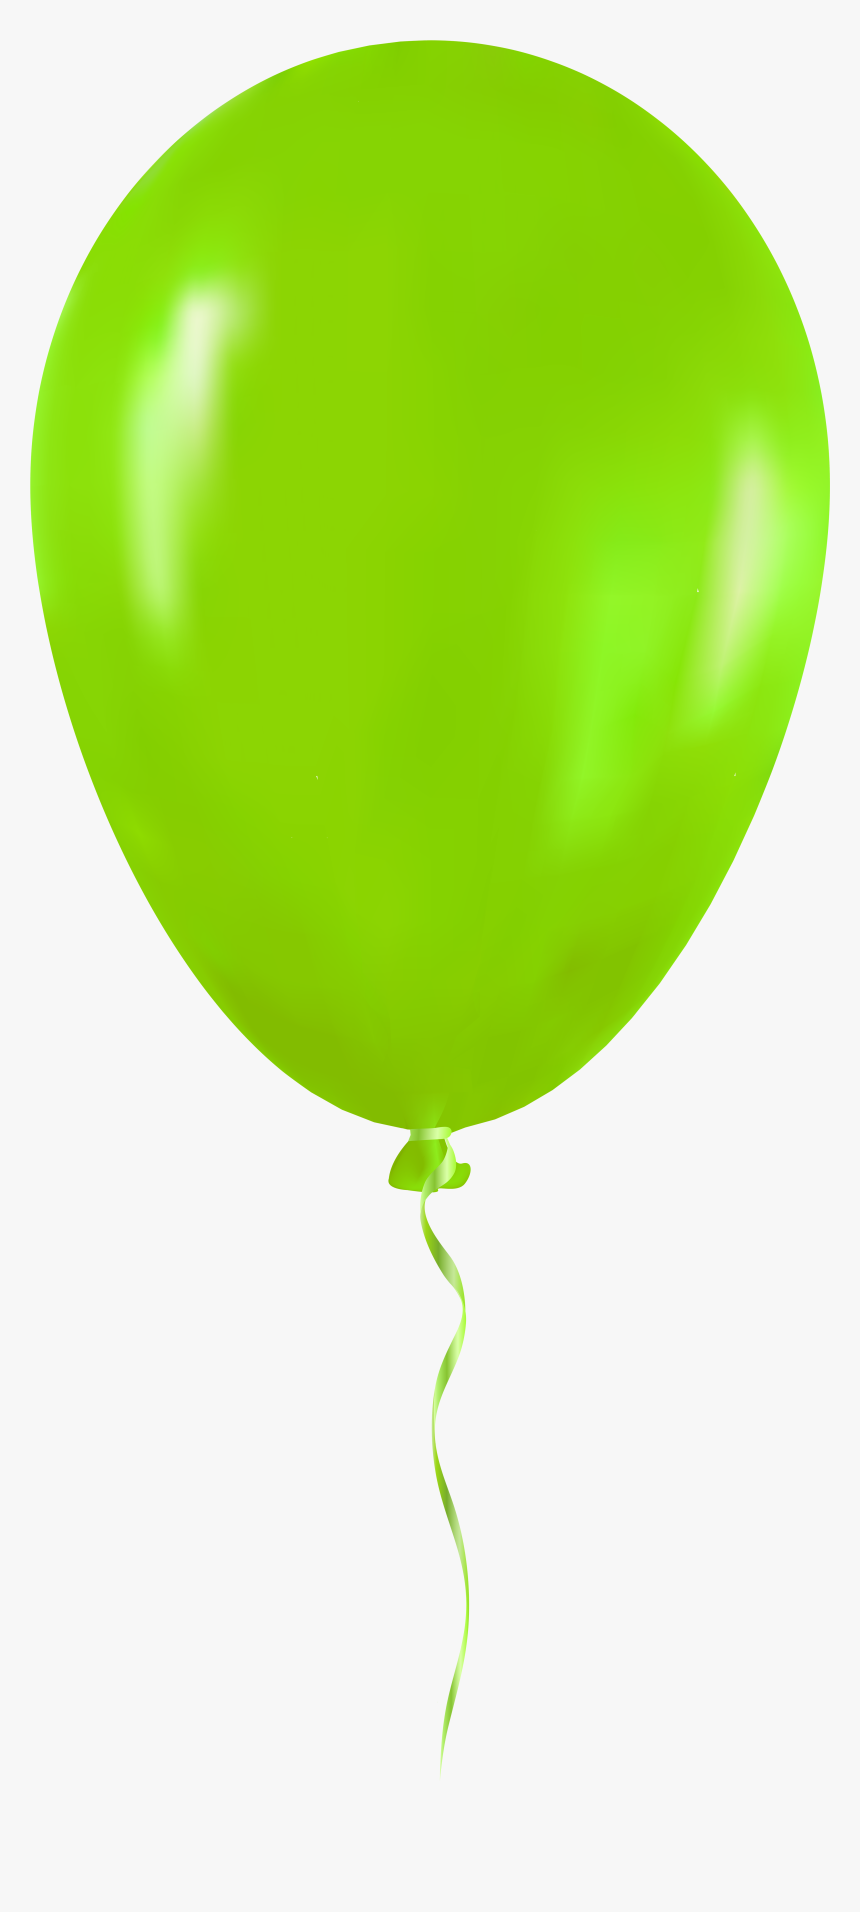 Green Balloon Png Clip Art - Transparent Background Cartoon Balloon, Png Download, Free Download